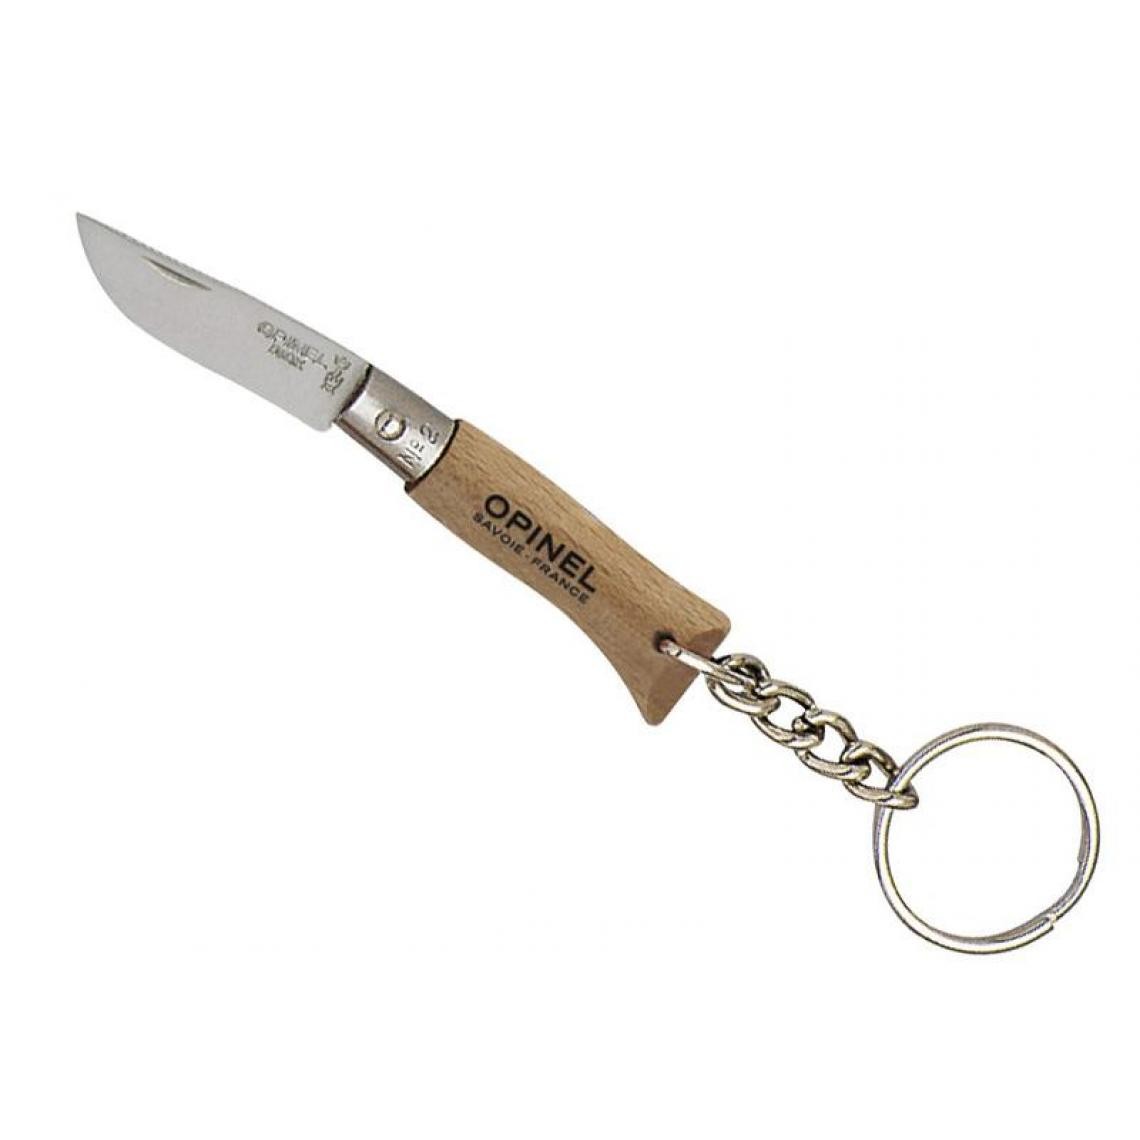 Opinel - OPINEL - 950 - BOITE 12 OPINEL PORTE-CLES N.2 INOX - Outils de coupe